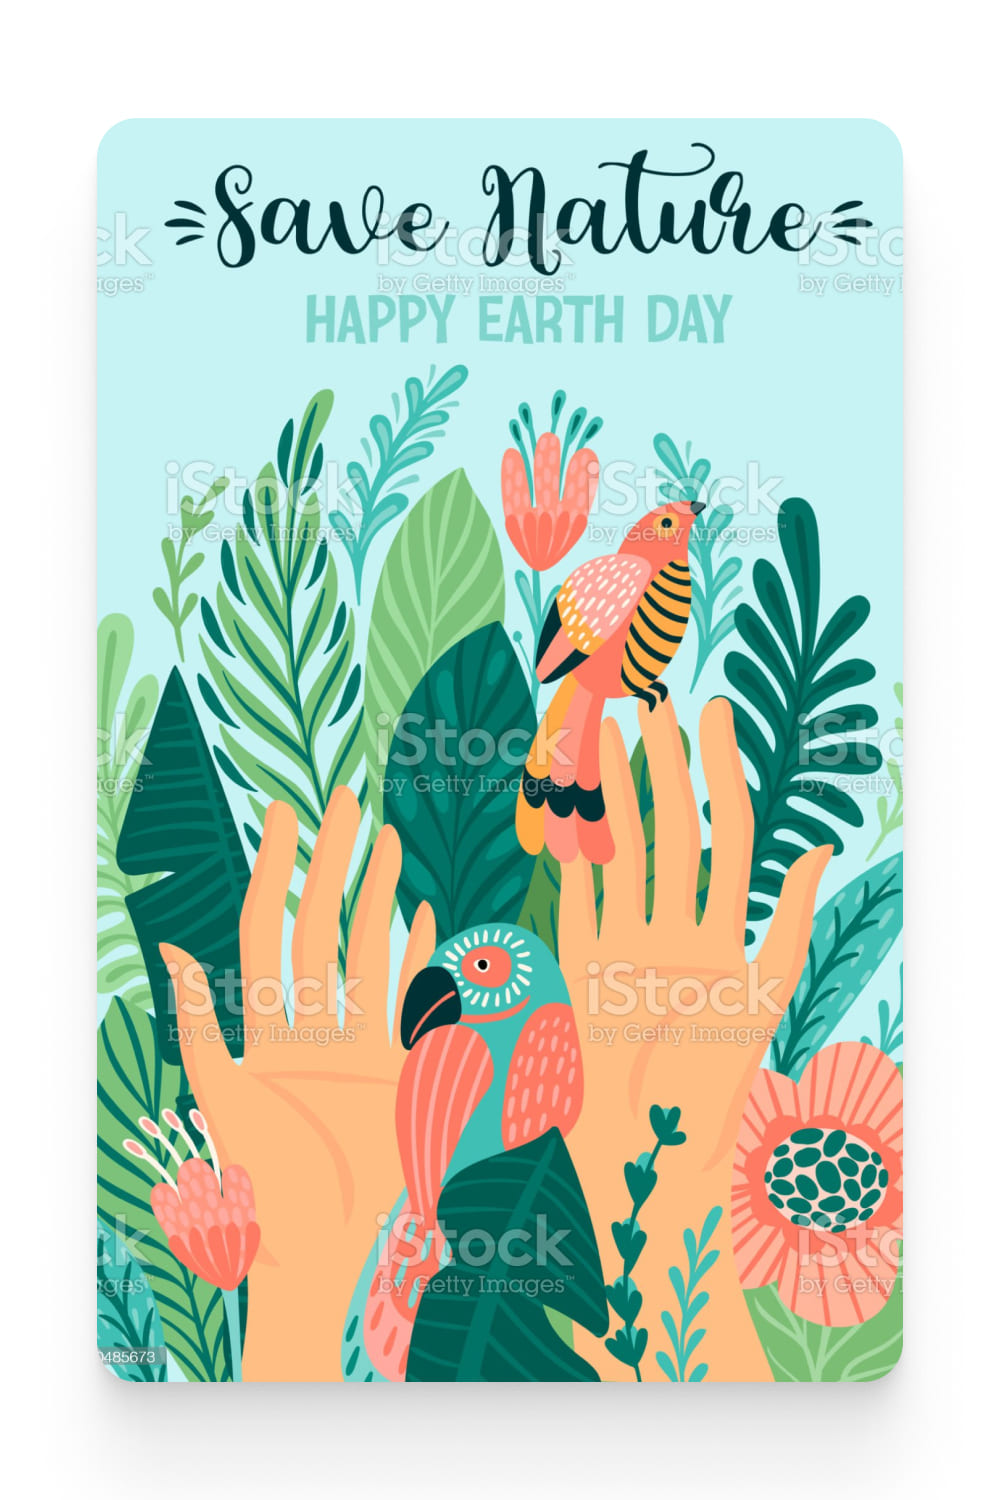 Drawn banner with hands and flowers and birds. Save Nature. Happy Earth Day.